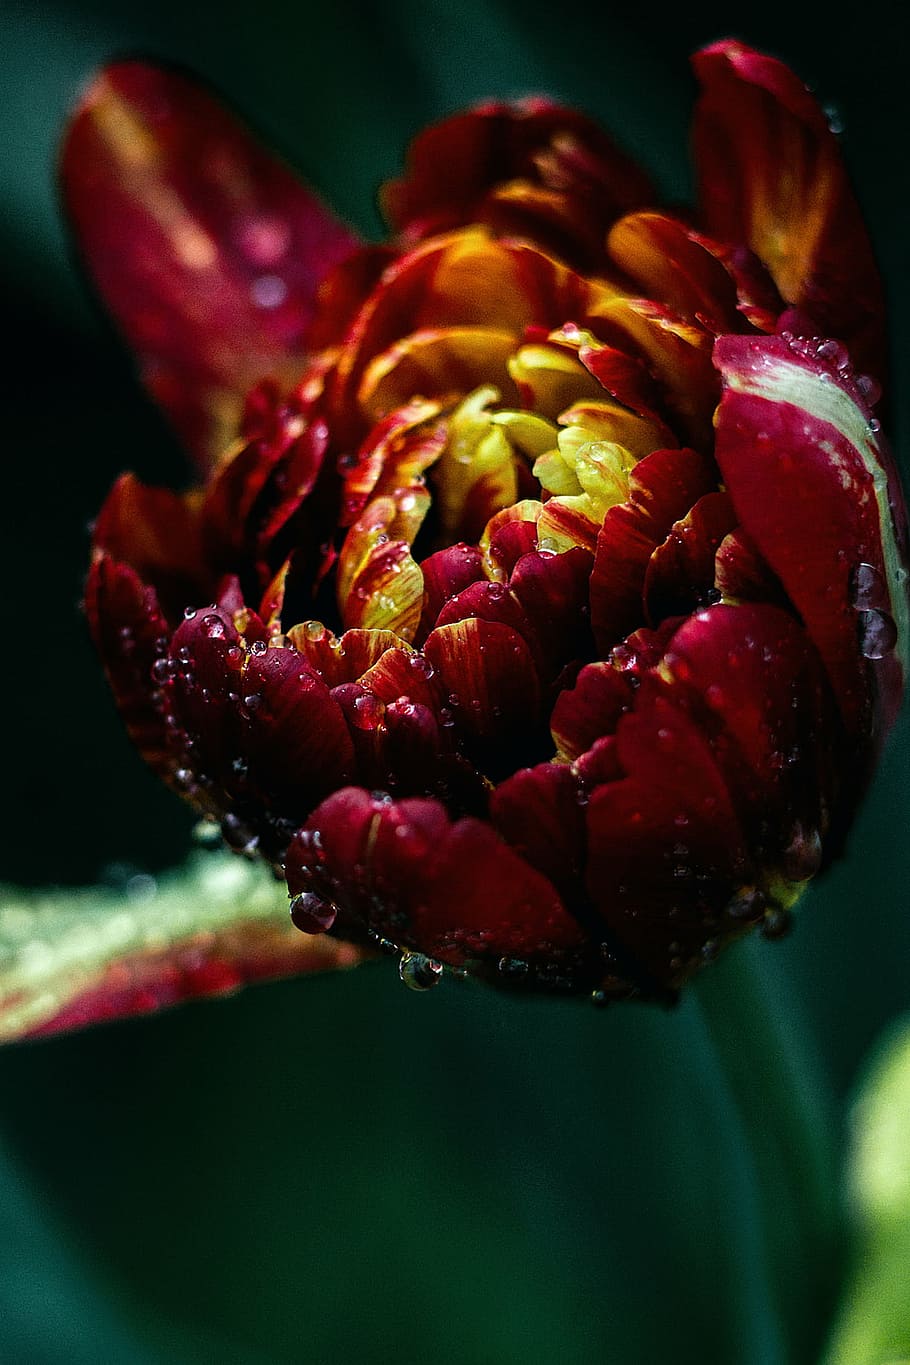 closeup, red, yellow, tulip flower bud, water droplets, nature, plants, bud, petals, water